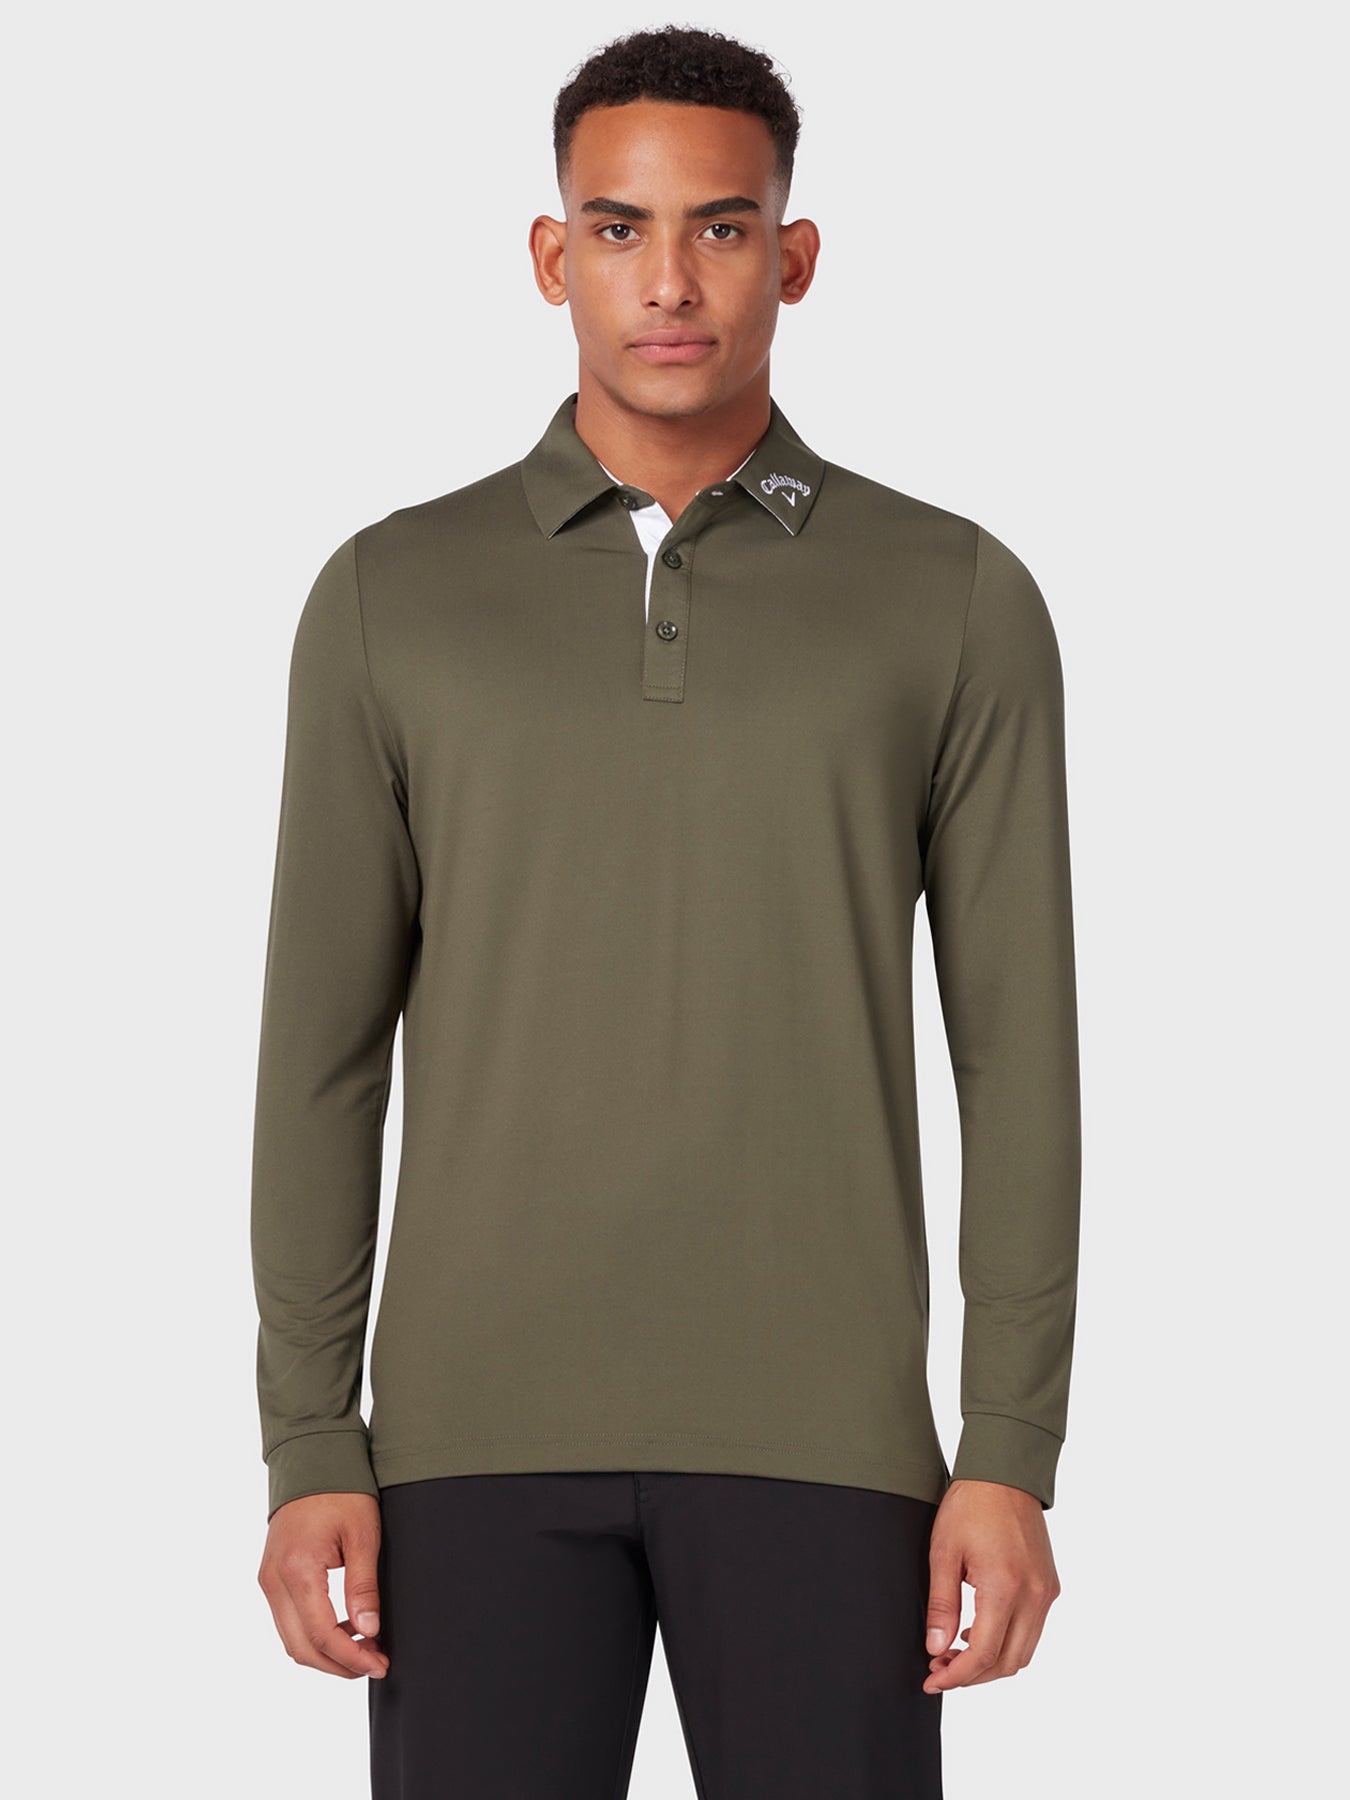 View Long Sleeve Performance Polo In Black Lichen information